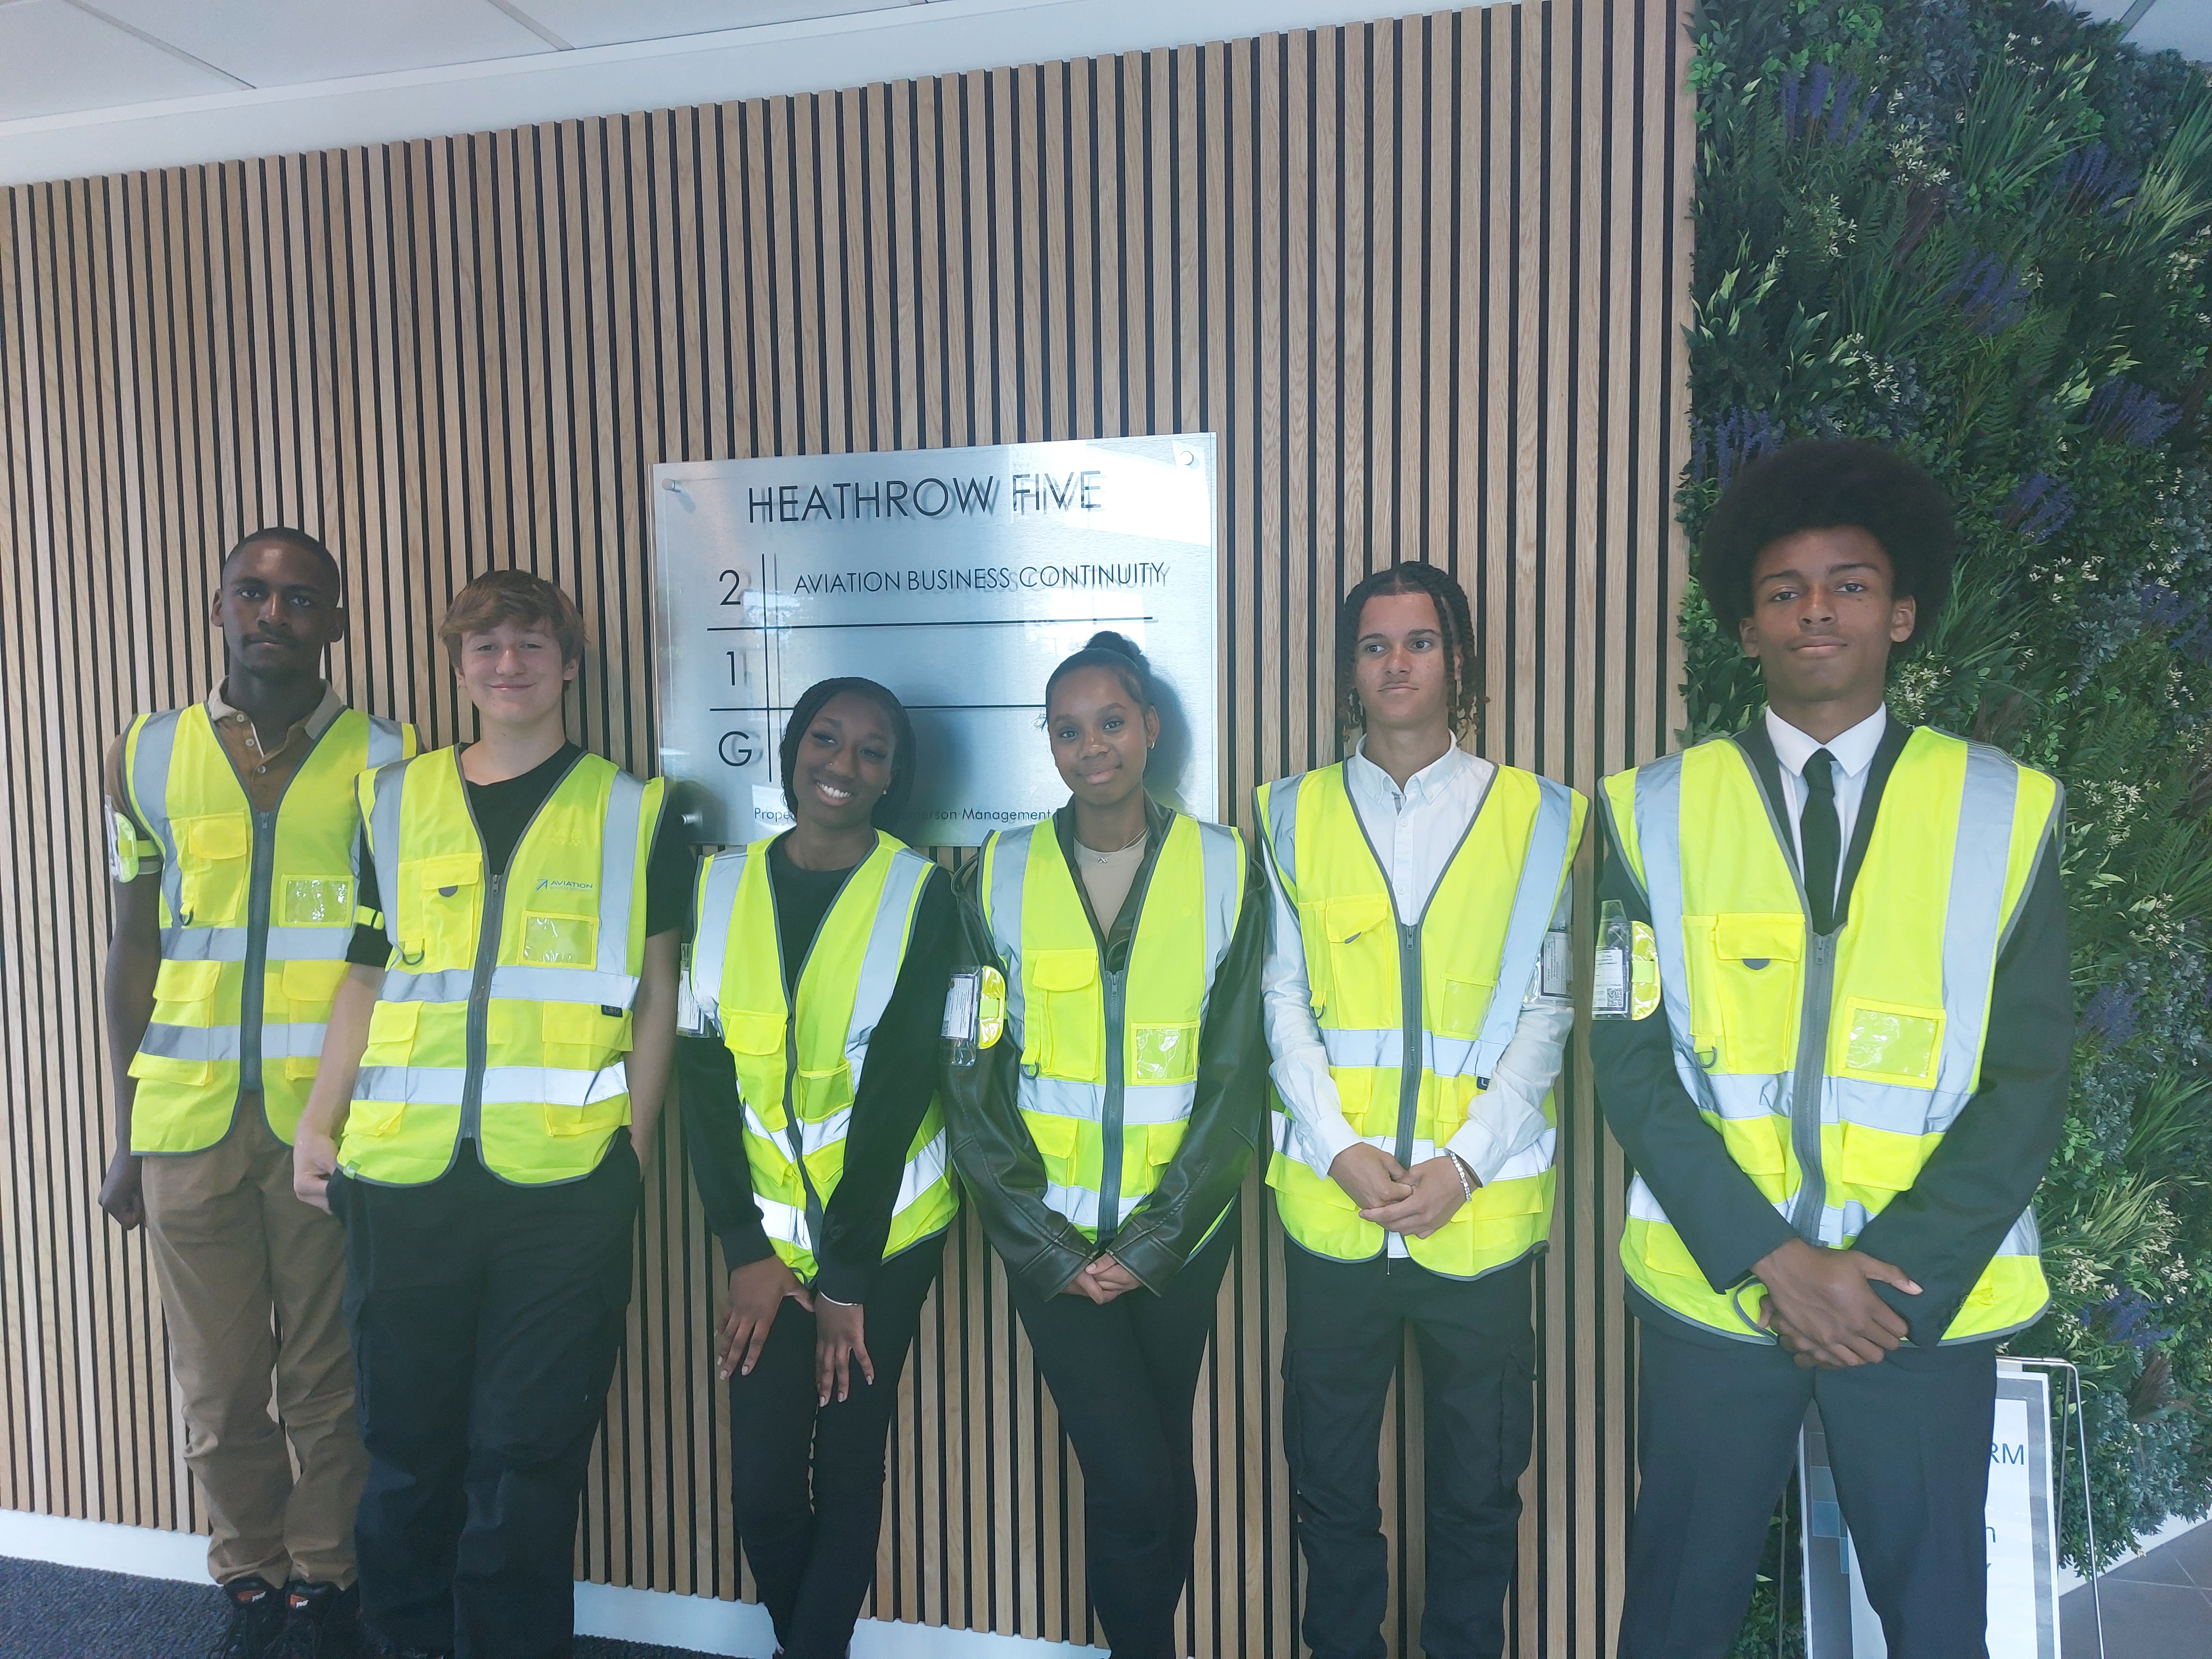 Youth in High vis jackets at Heathrow